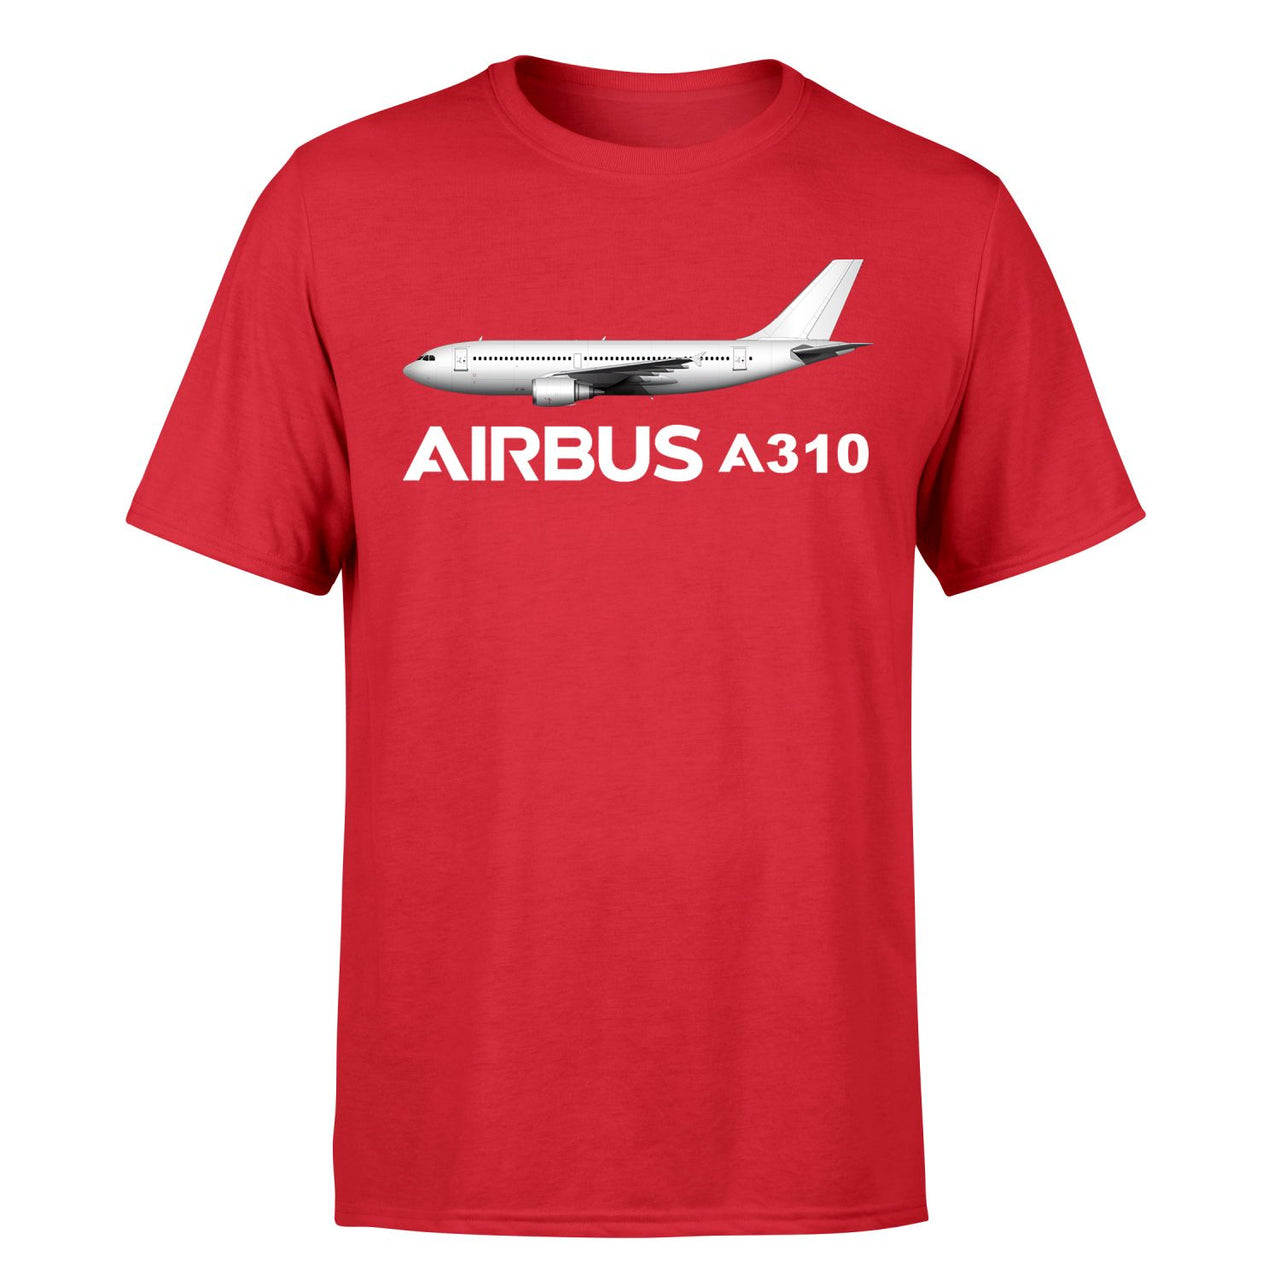 The Airbus A310 Designed T-Shirts